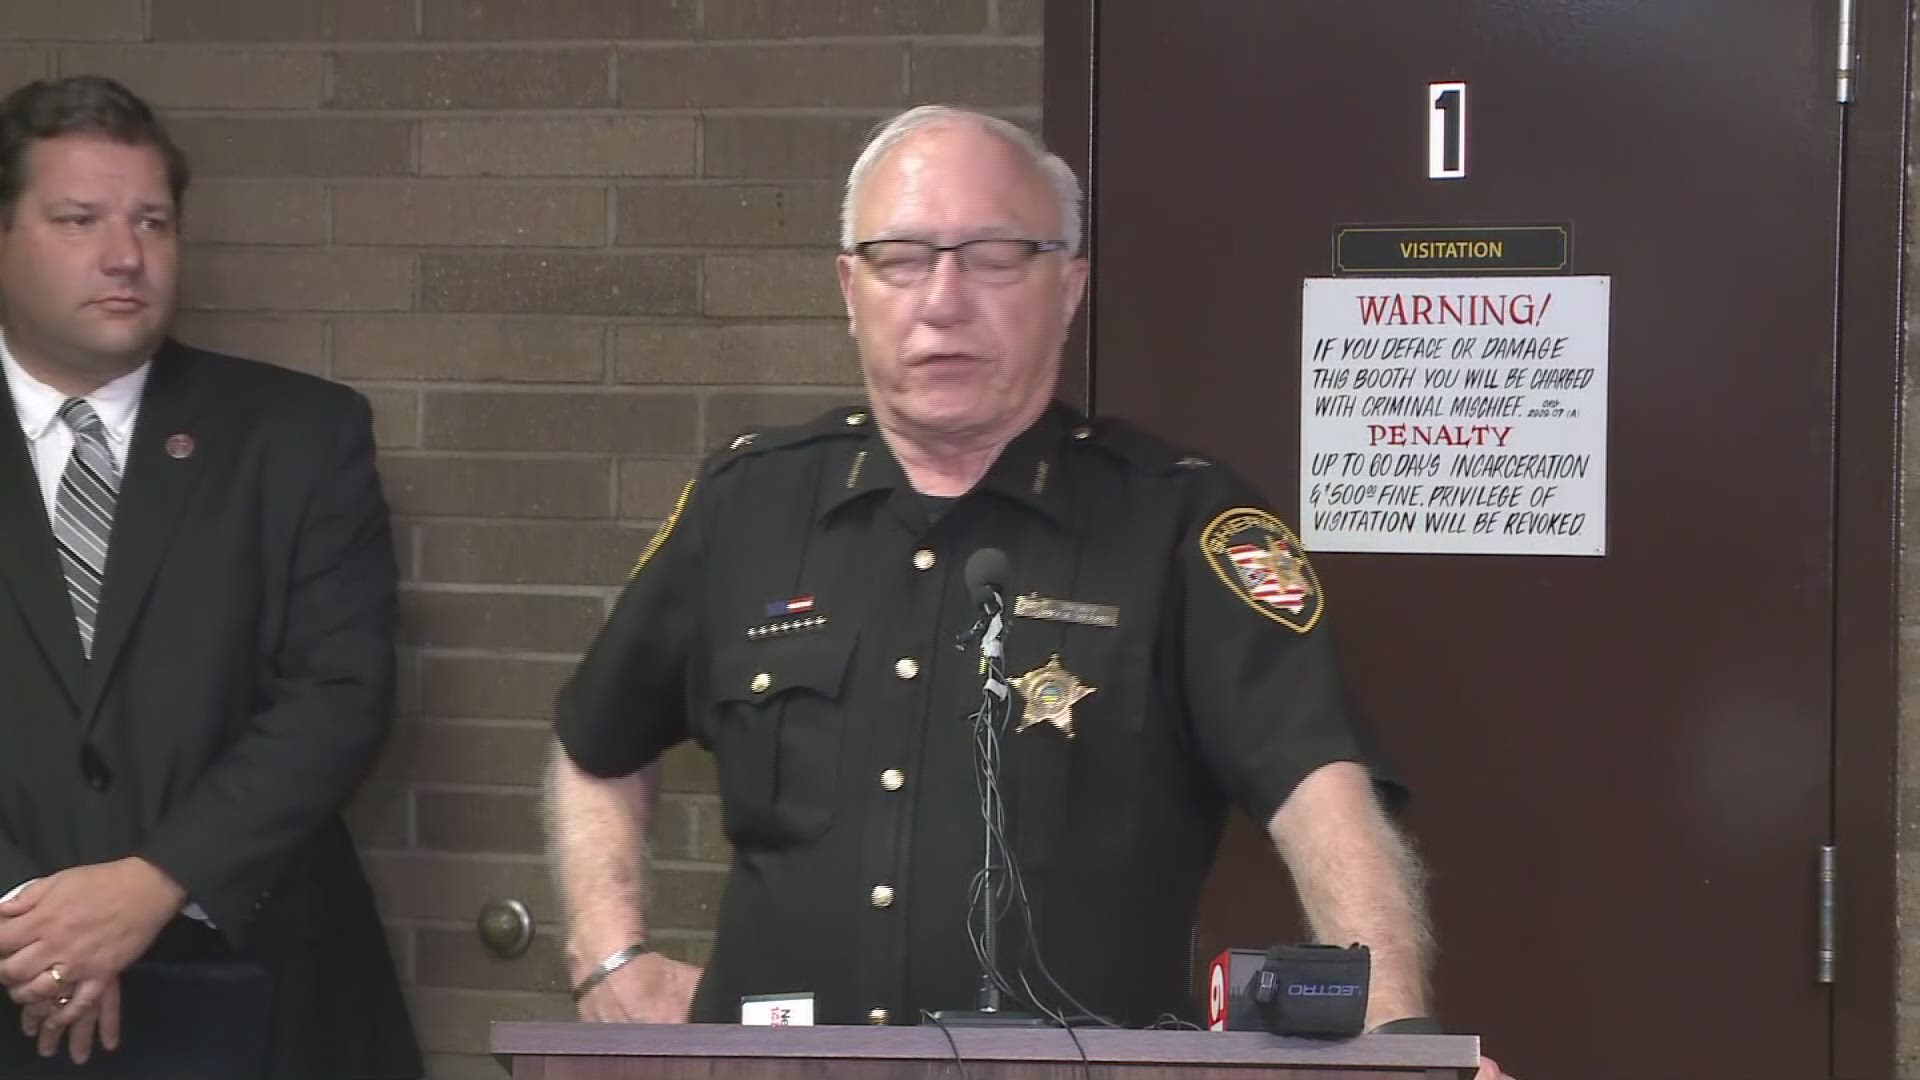 Officials in Carroll County hold press conference after 14-year-old found dead